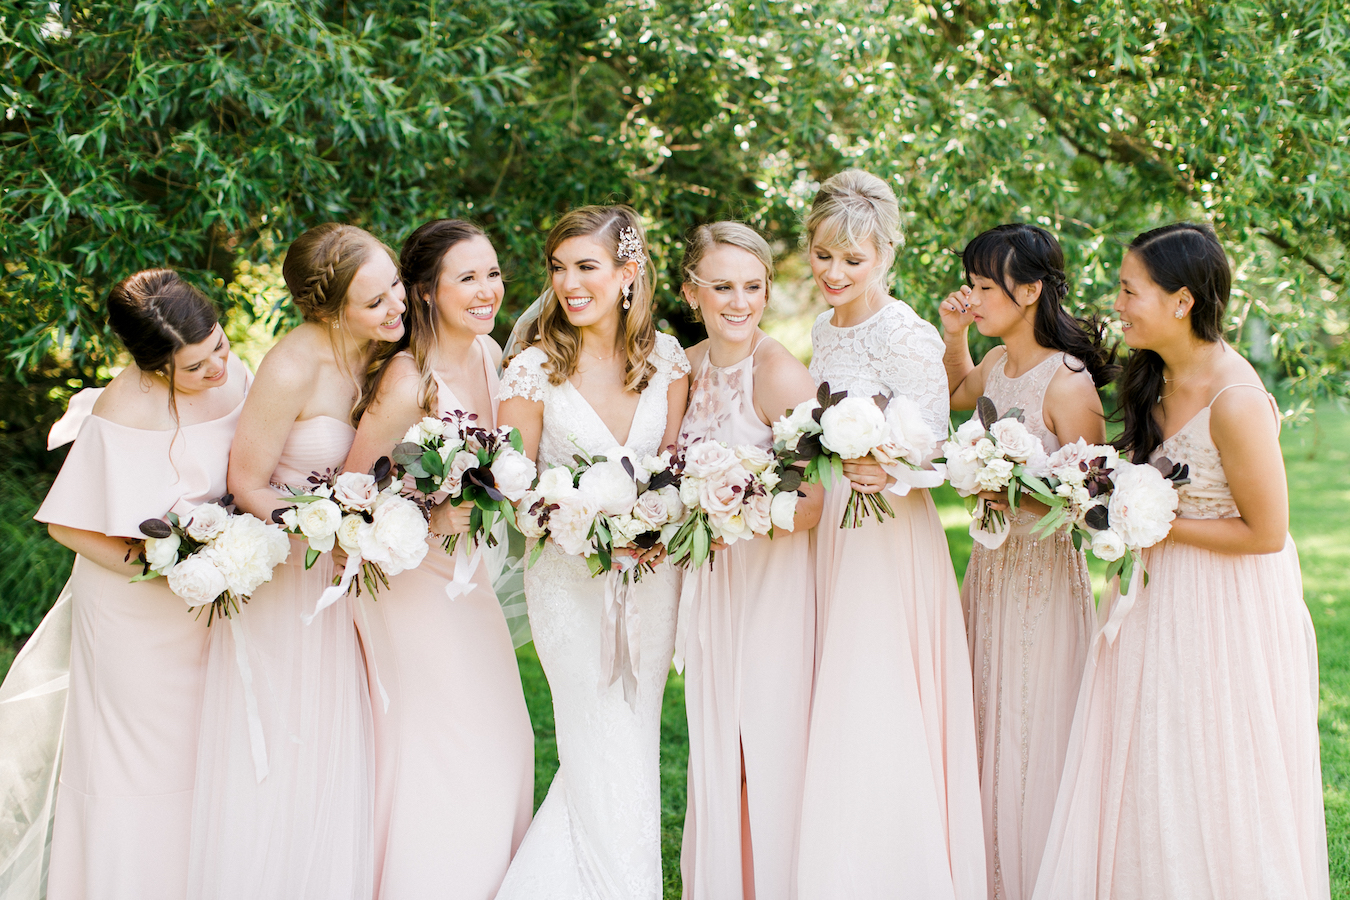 A bride and her bridesmaids smiling 